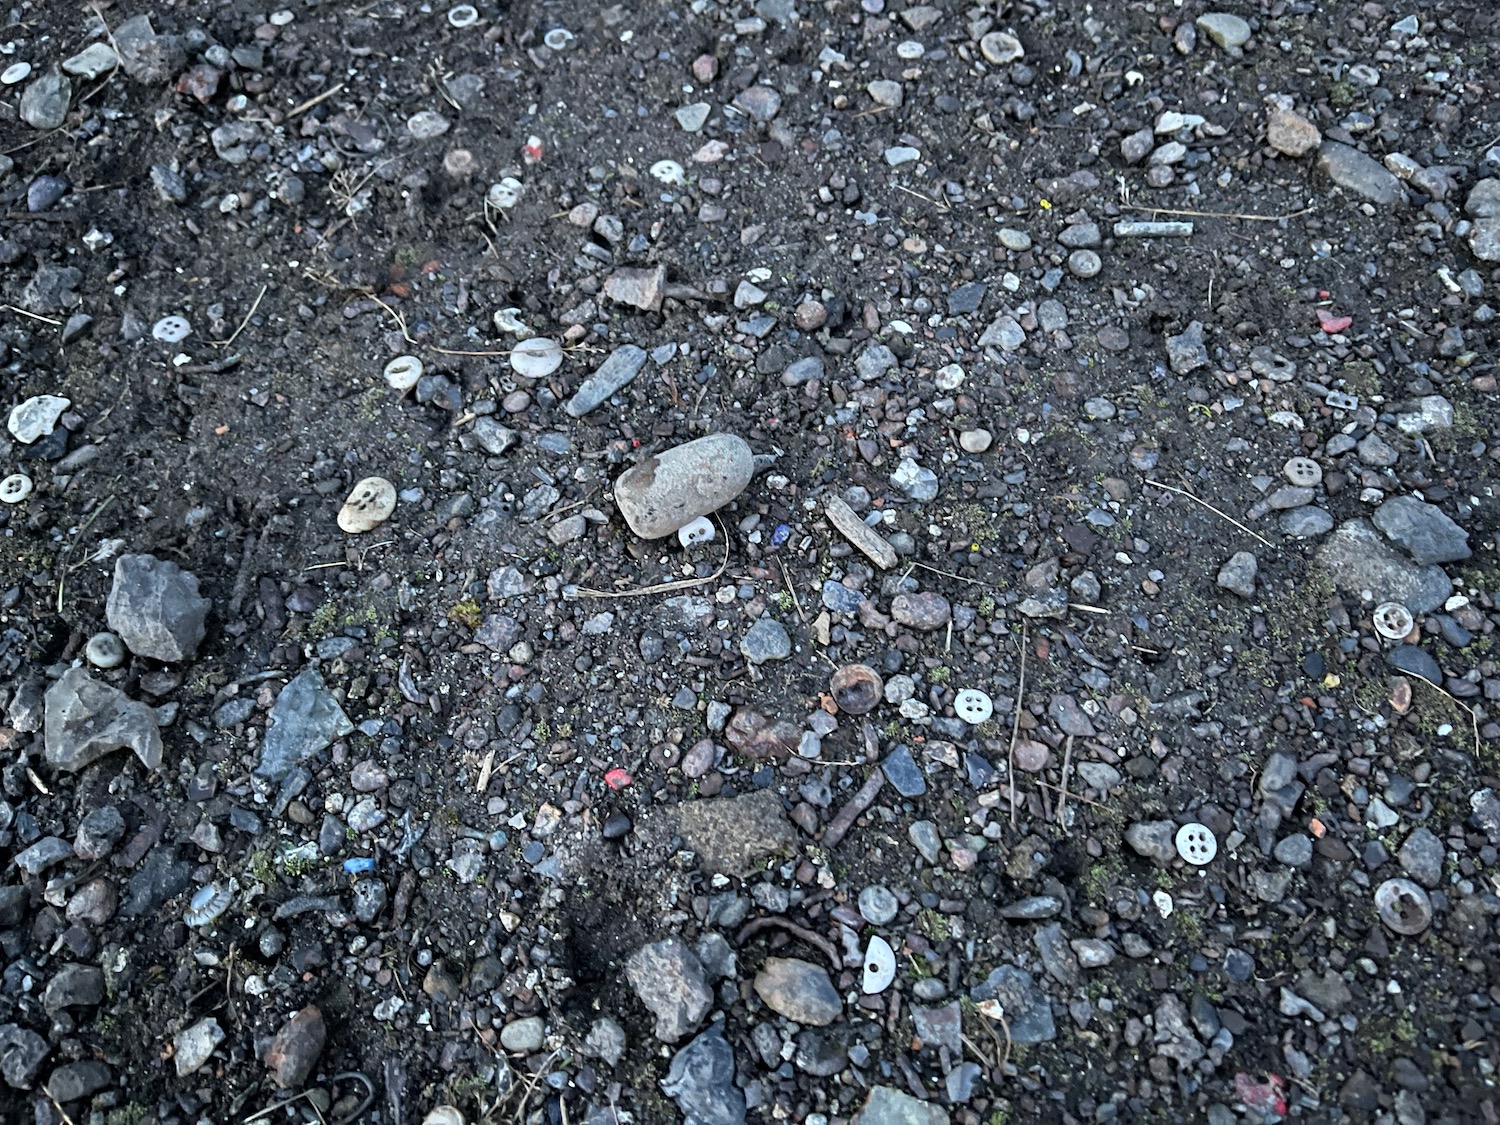 a close up of rocks and gravel